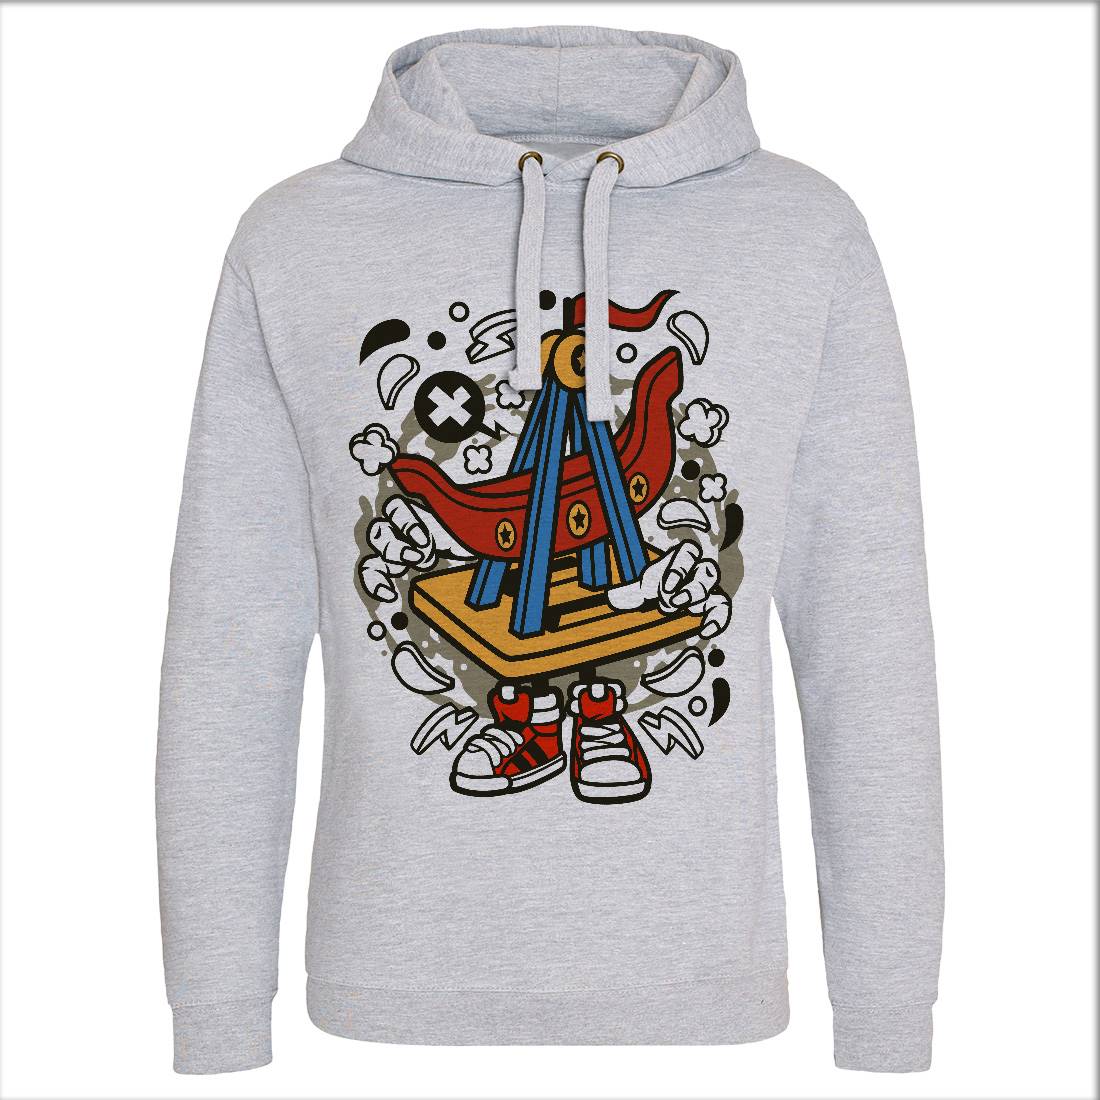 Ship Toys Mens Hoodie Without Pocket Navy C227